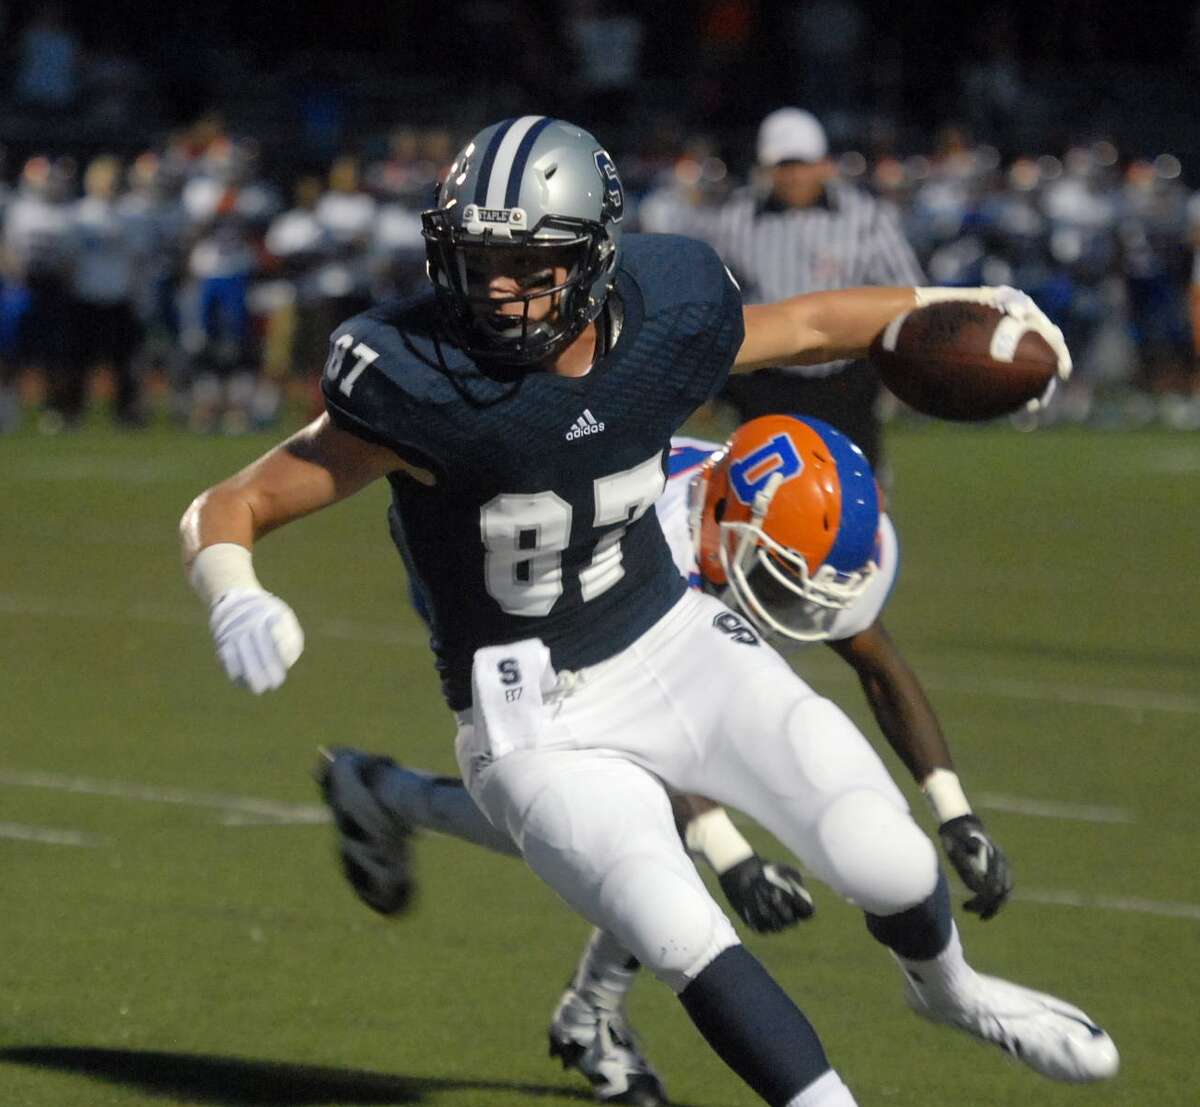 Staples’ Ryan Fitton makes his way to the end zone in the first quarter of play against Danbury.